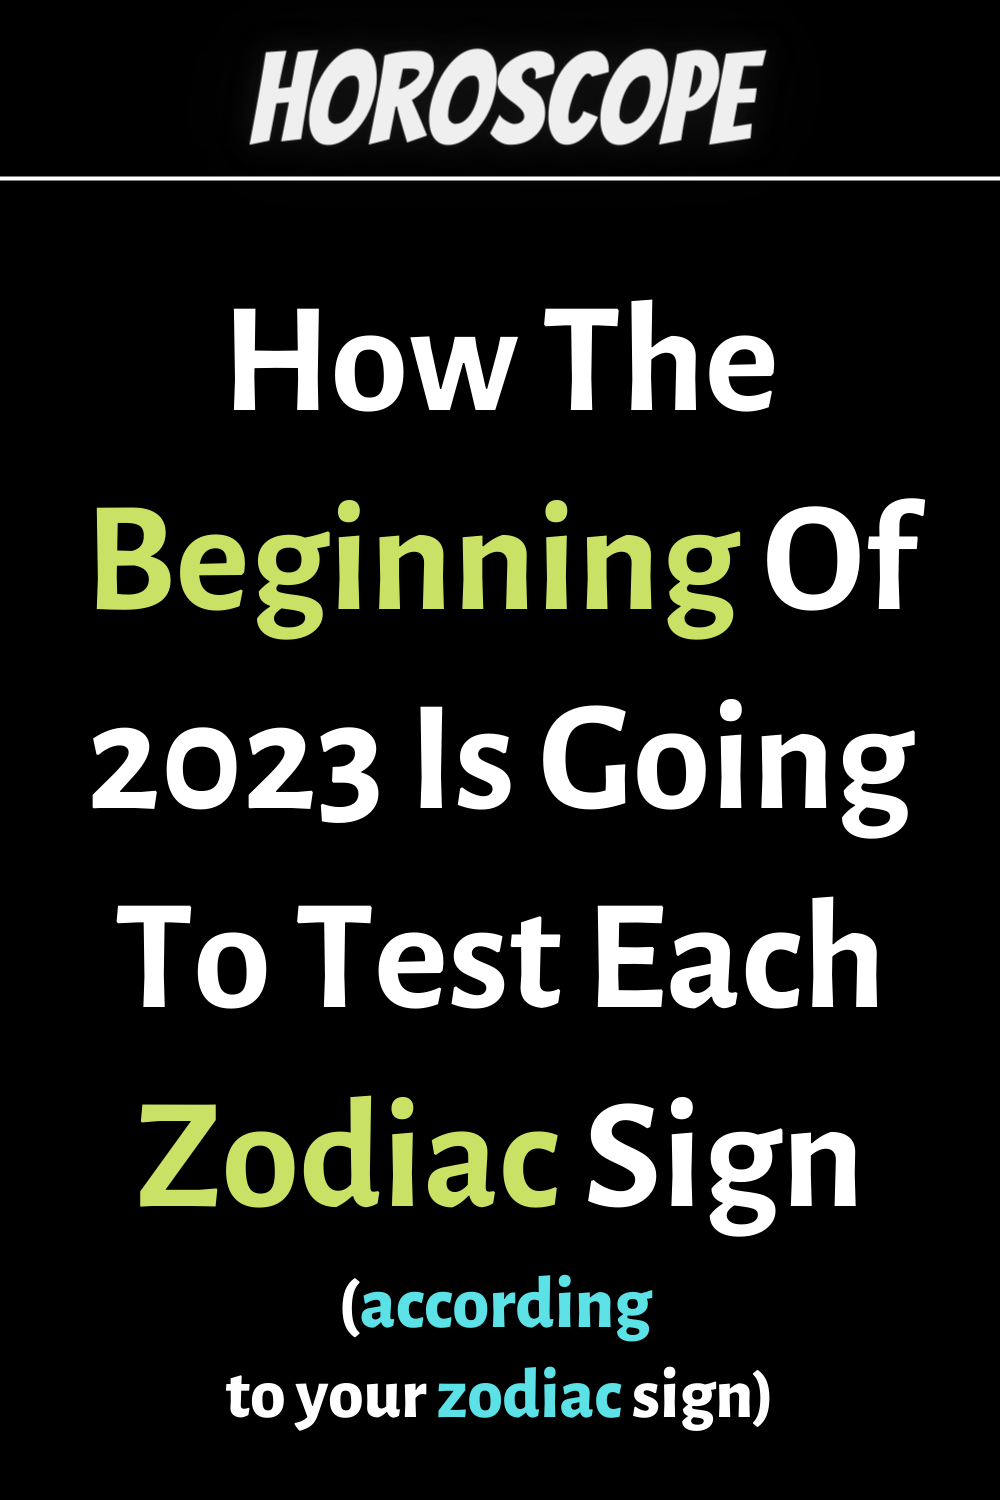 How The Beginning Of 2023 Is Going To Test Each Zodiac Sign